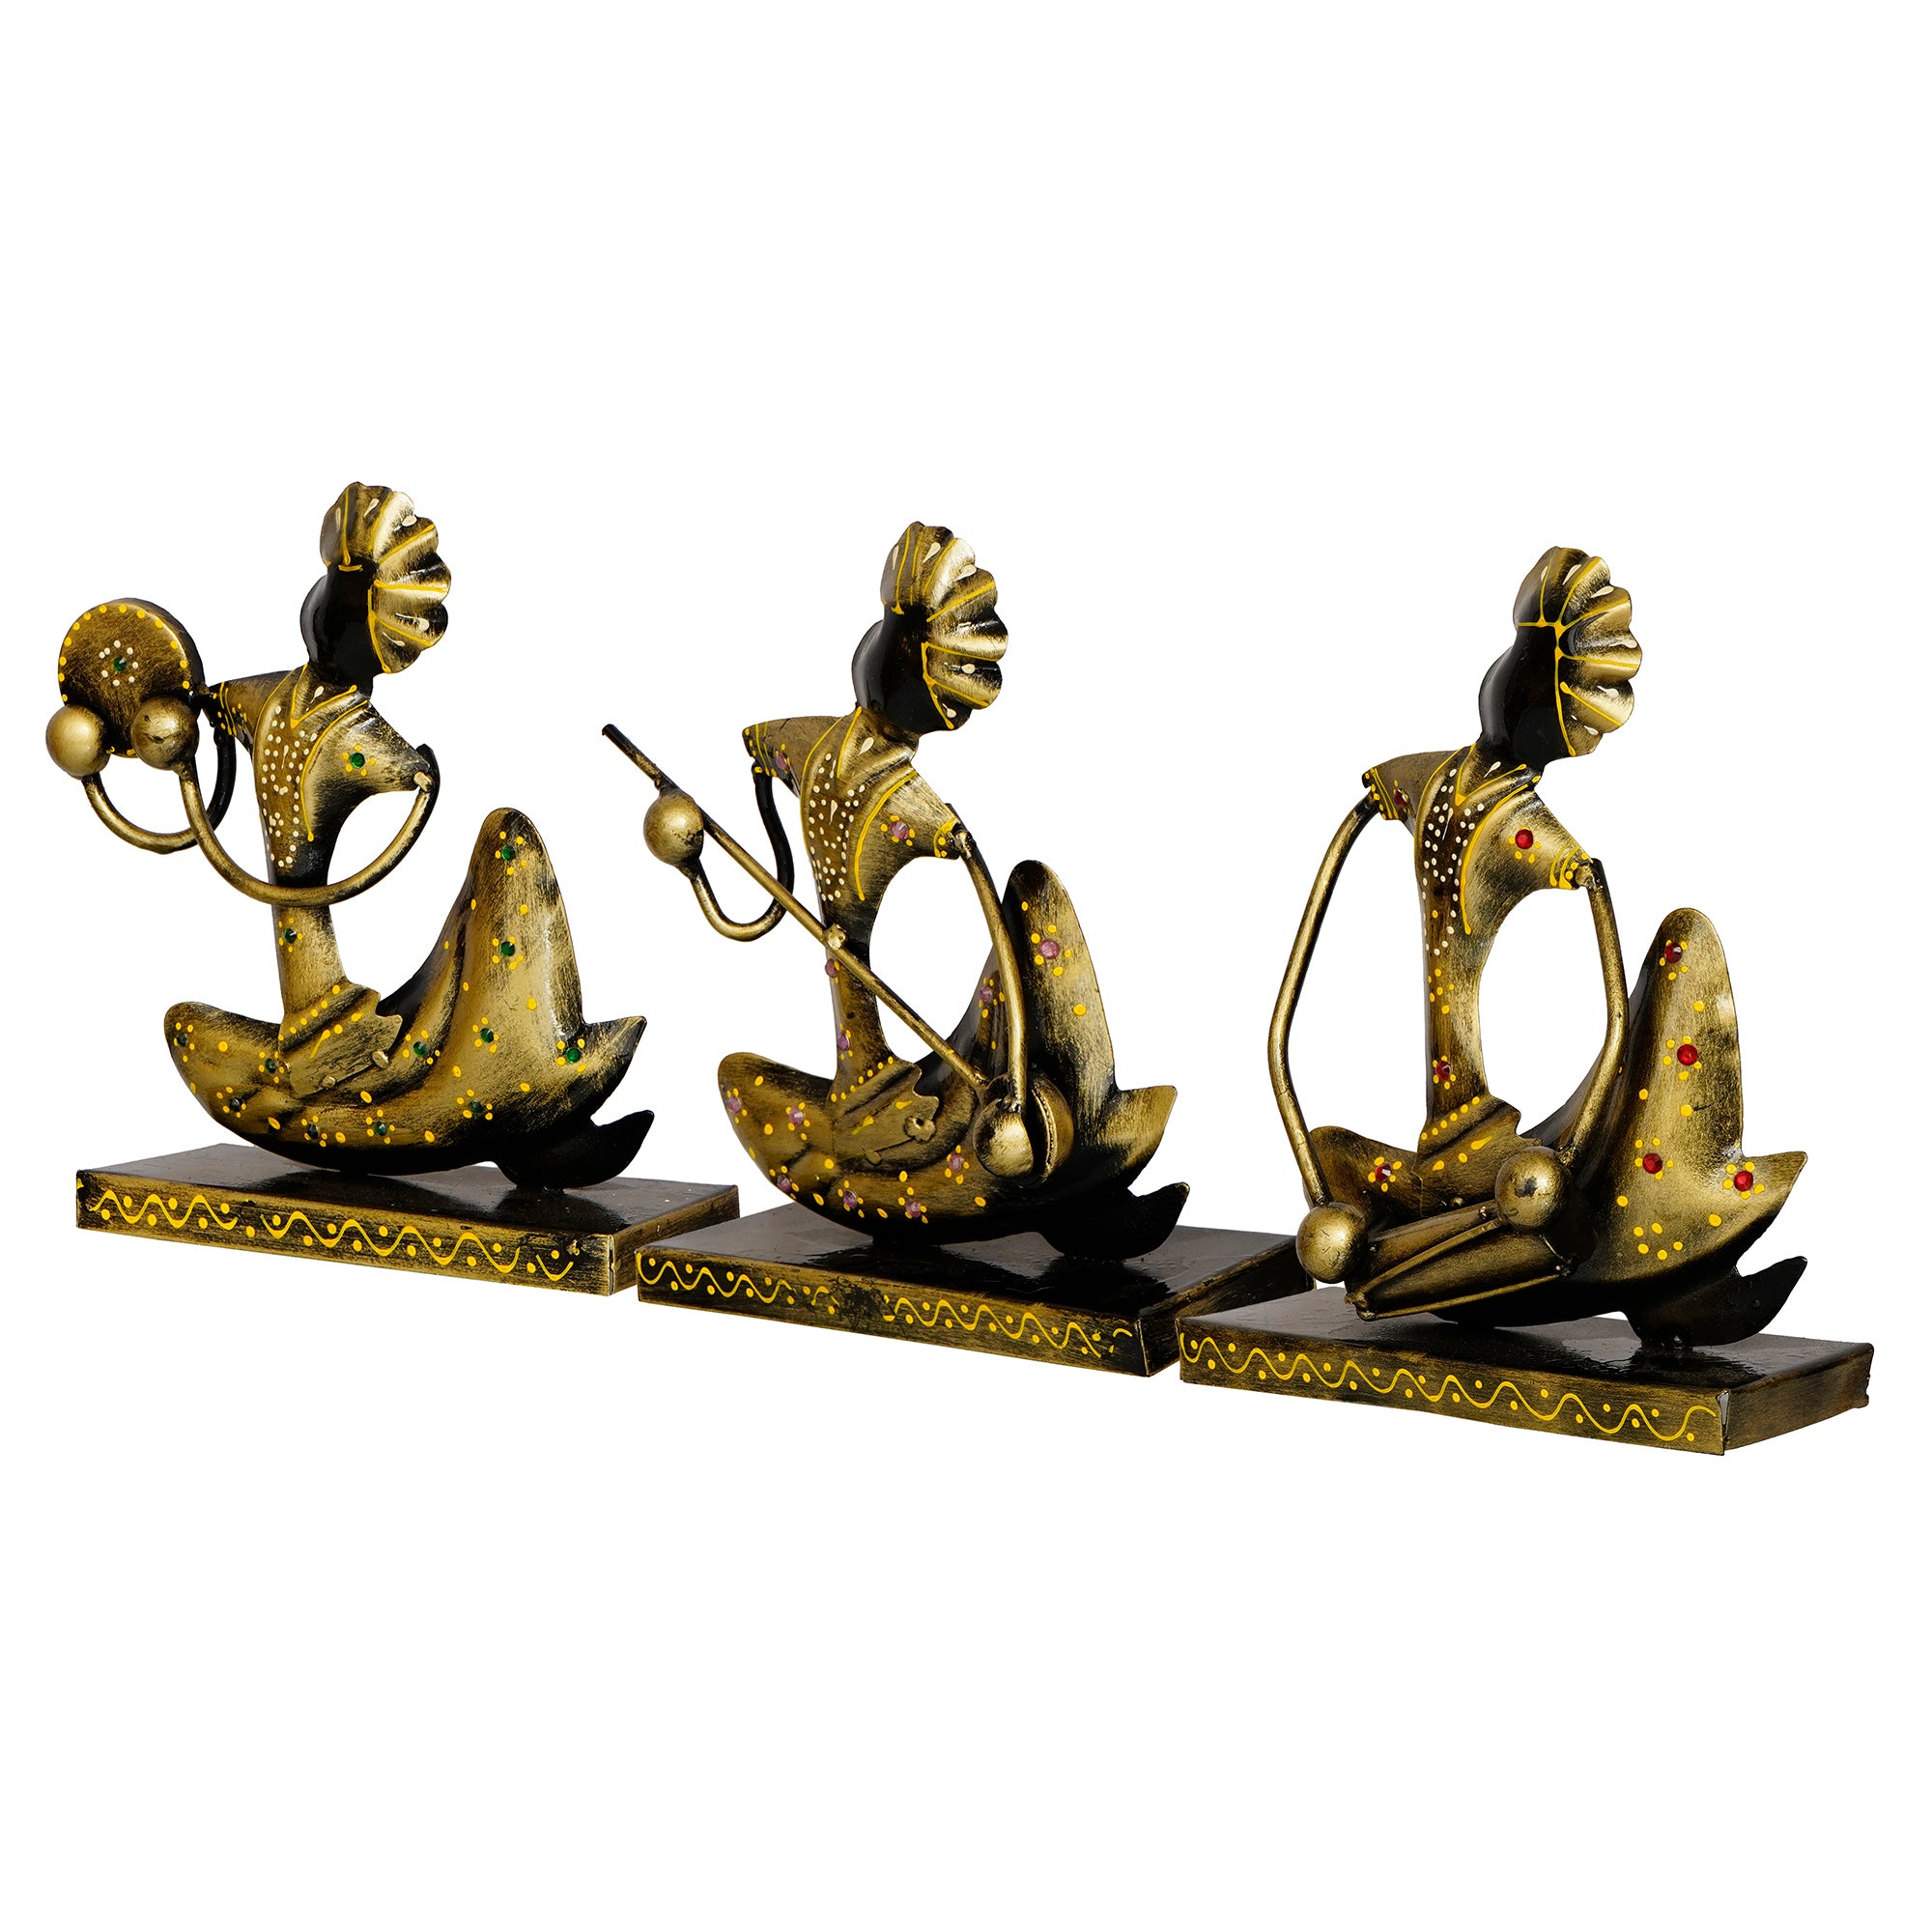 Iron Set of 3 Tribal Man Figurines with Paghdi Playing Tambourine/Dafli, Banjo, Dholak Musical Instruments Decorative Showpiece (Golden and Black) 4